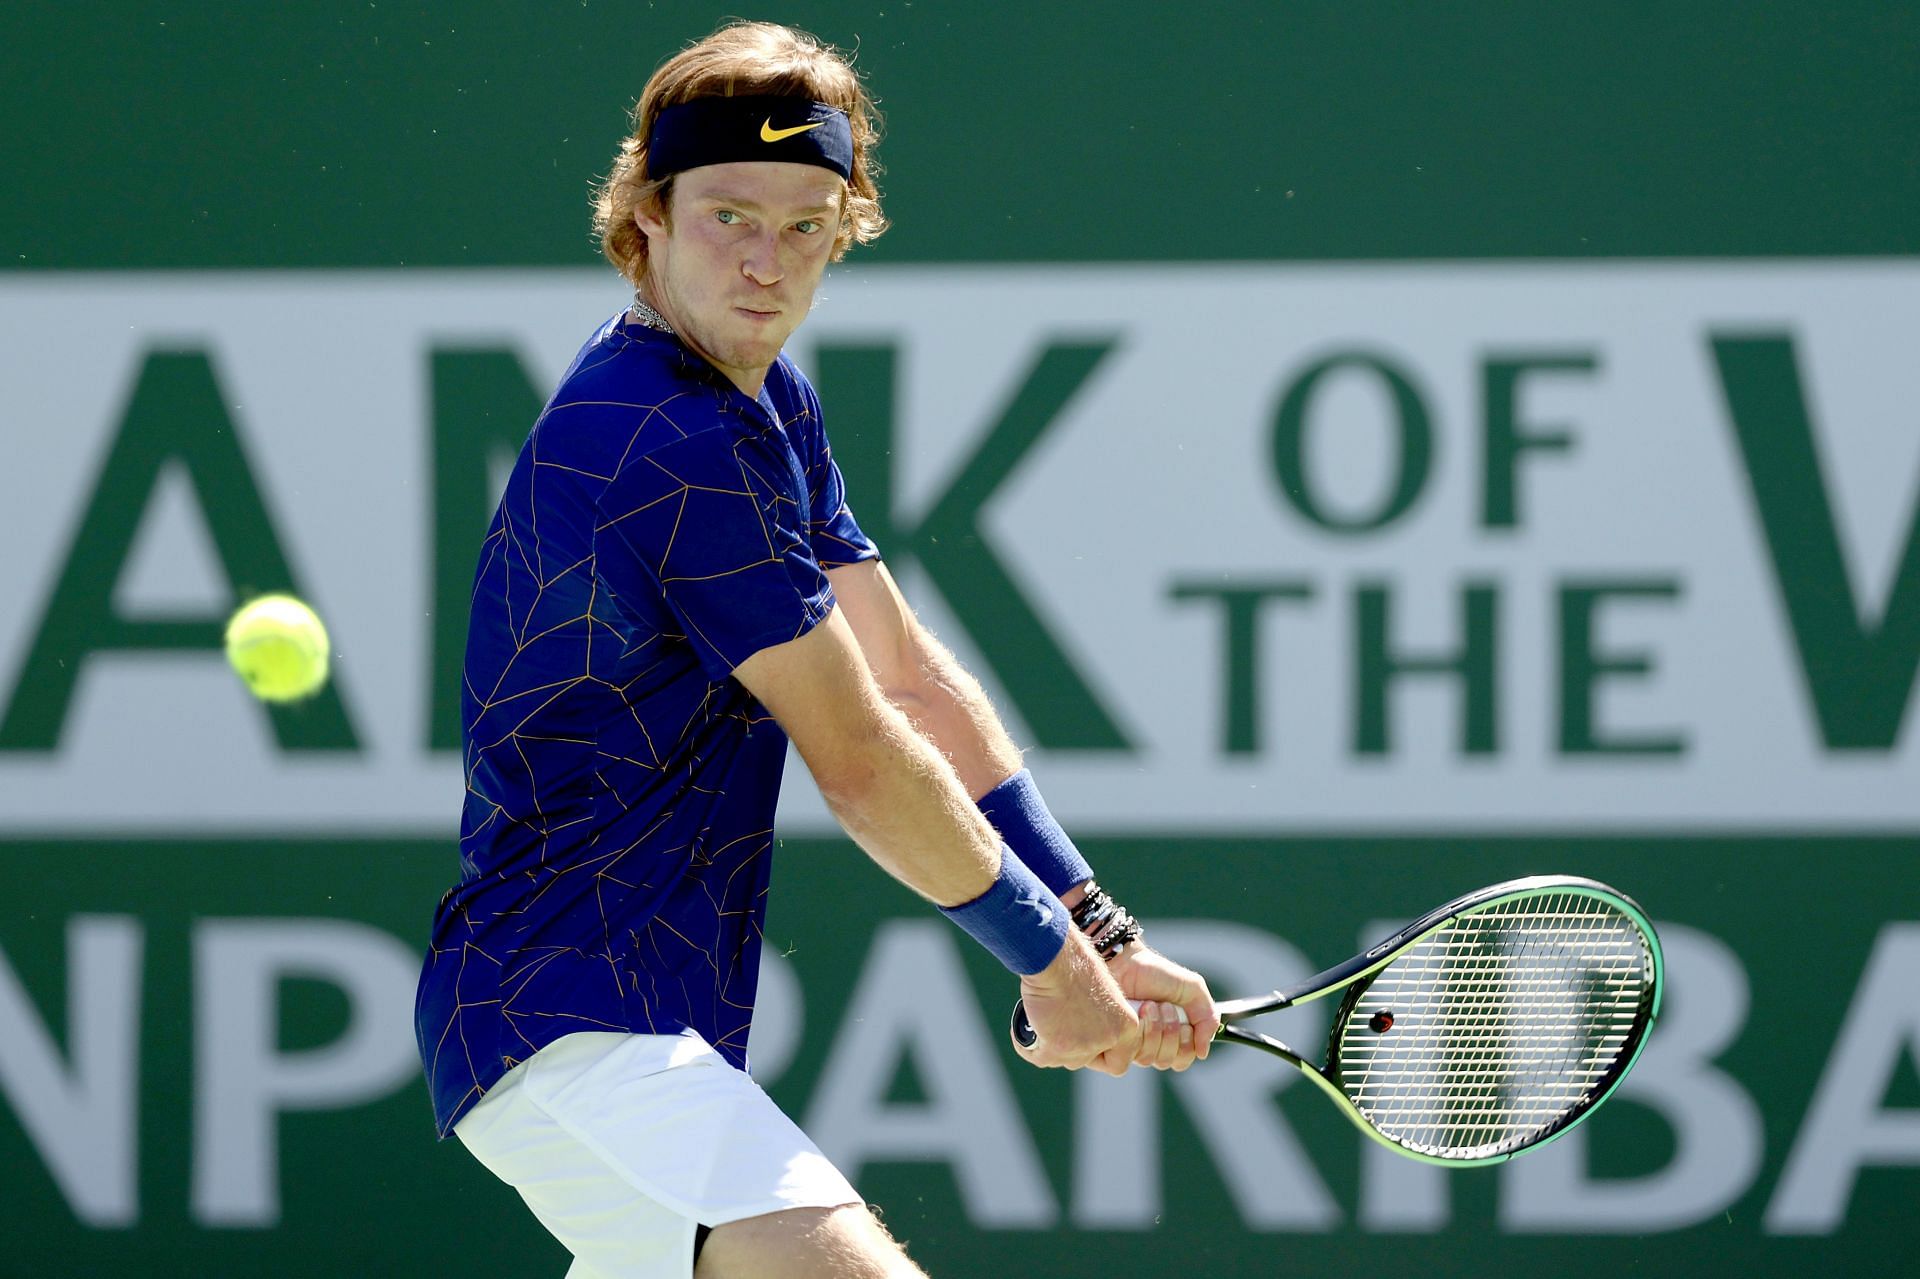 Andrey Rublev will look to make his third Masters 1000 final